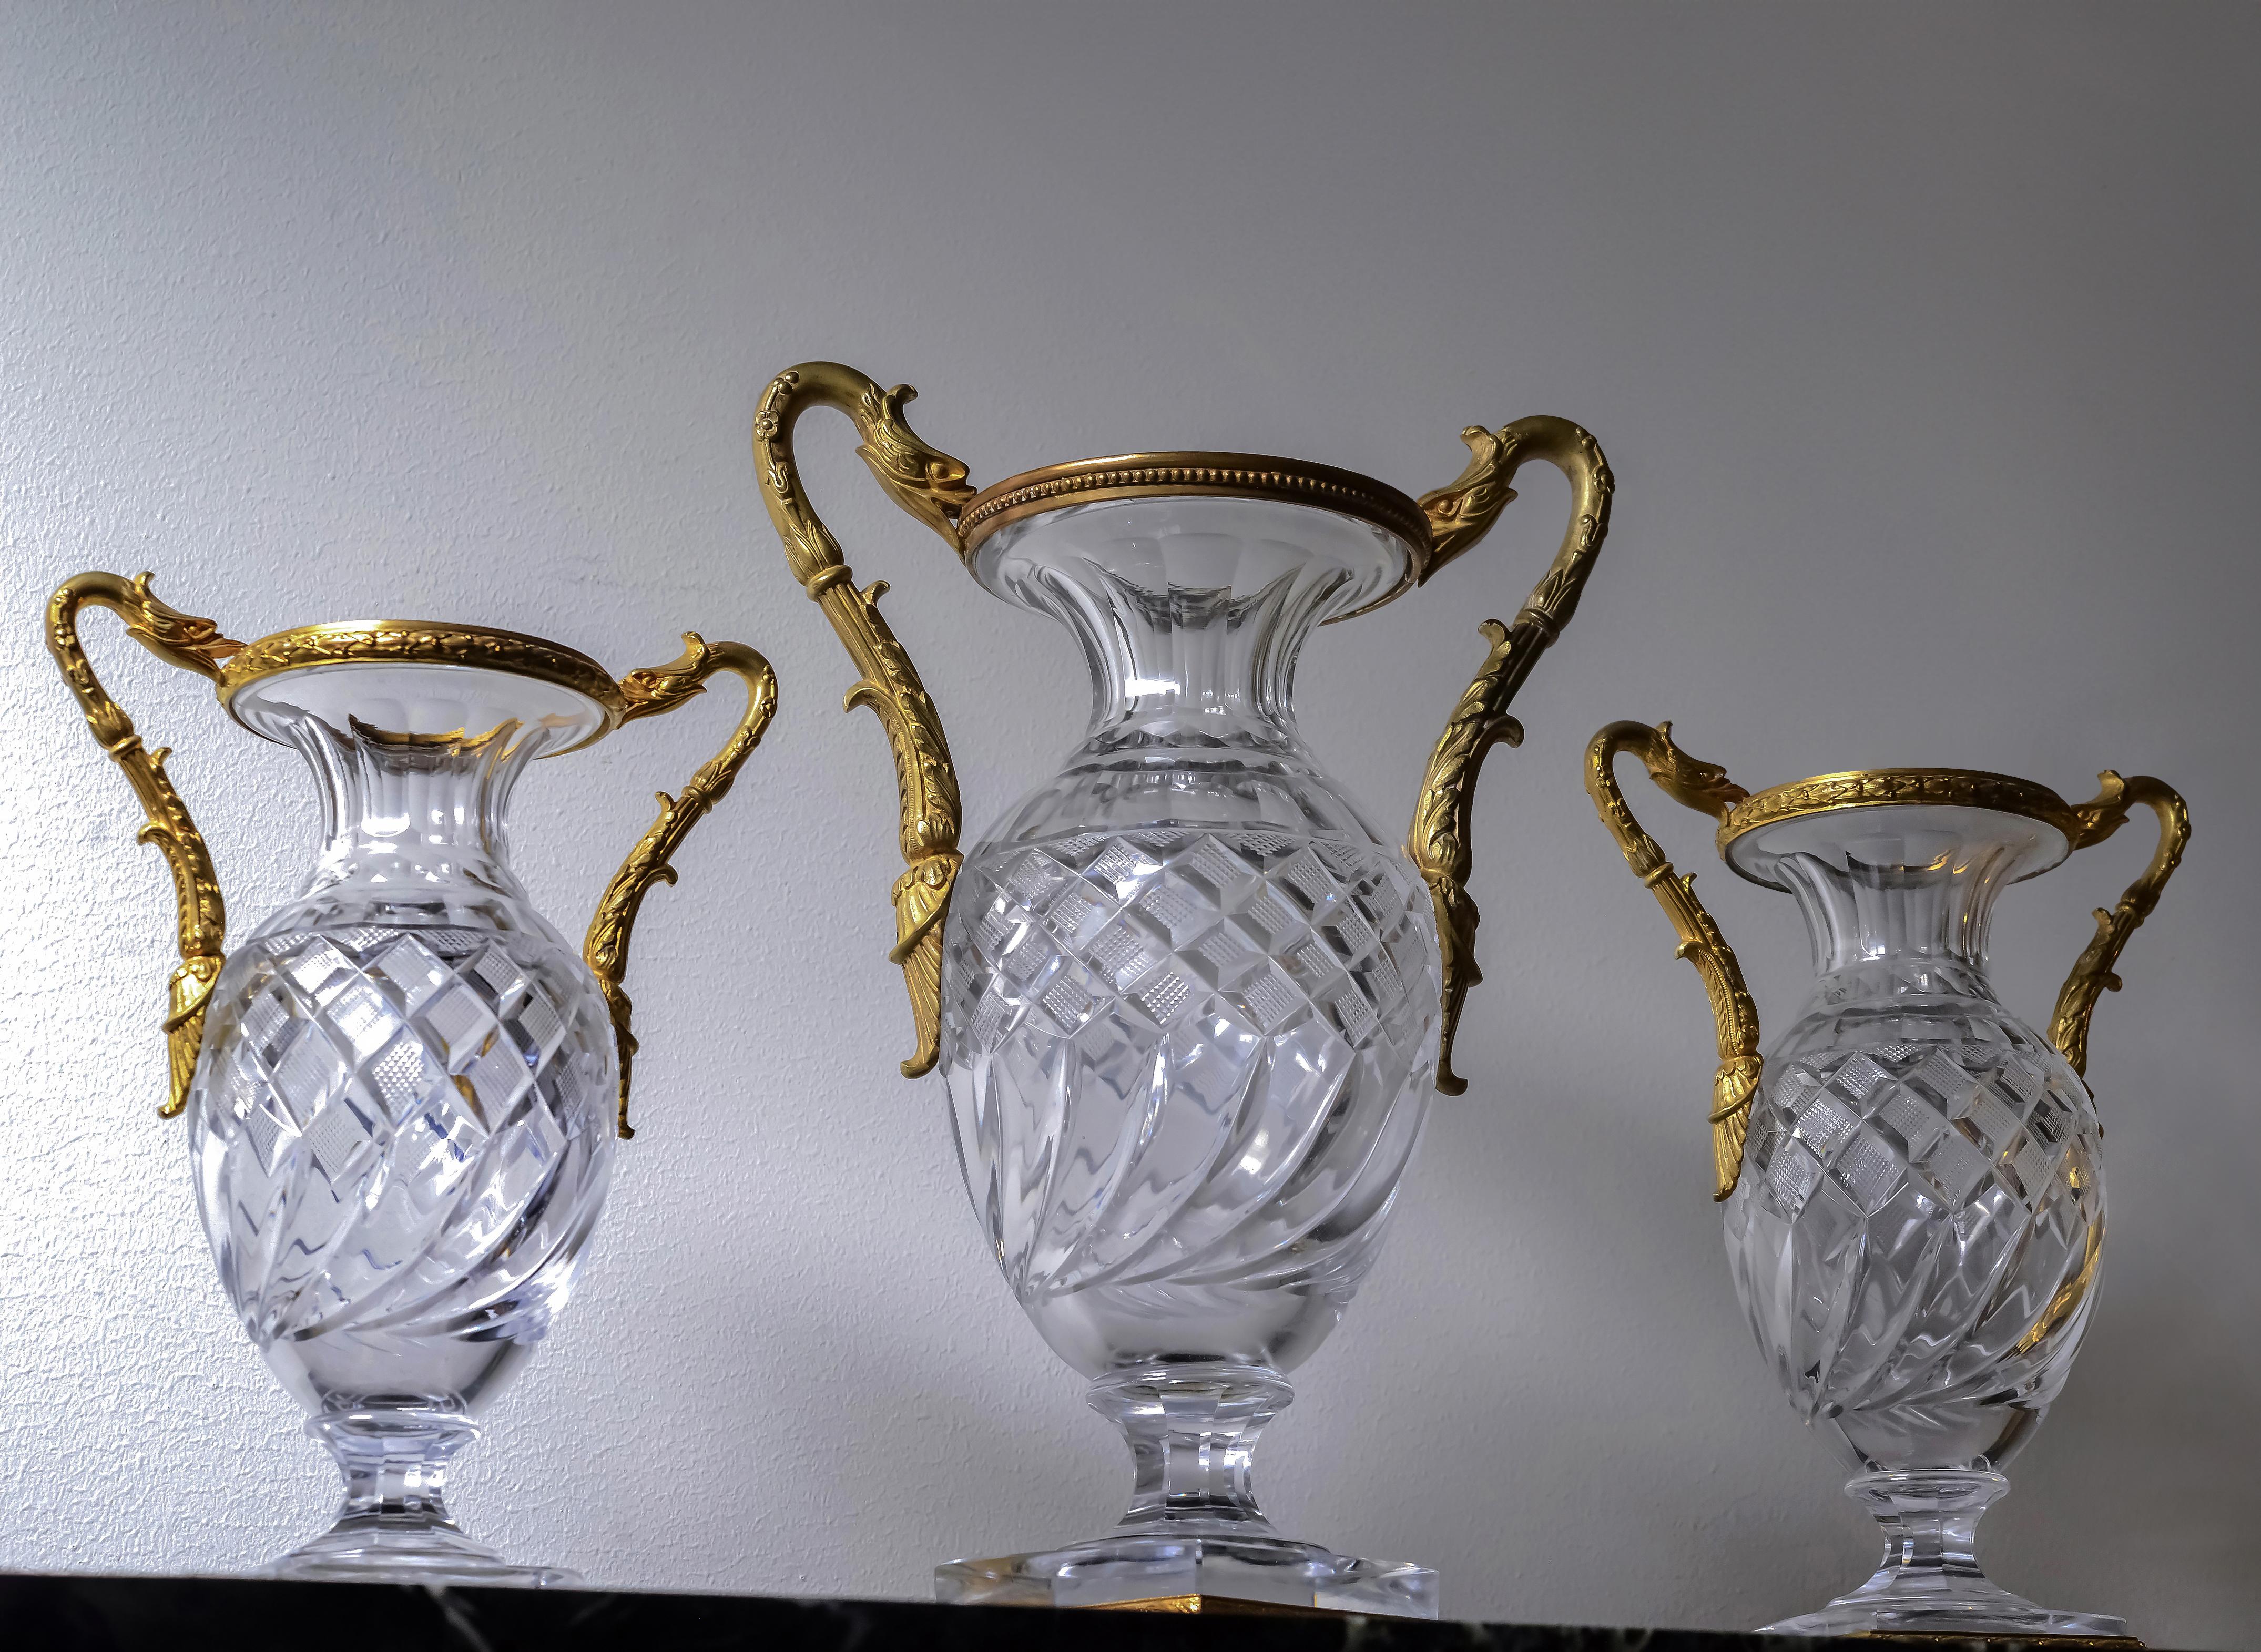 Carved Baccarat Empire Cut Crystal Glass Vases w Gilt Bronze Griffon Heads 19th century For Sale